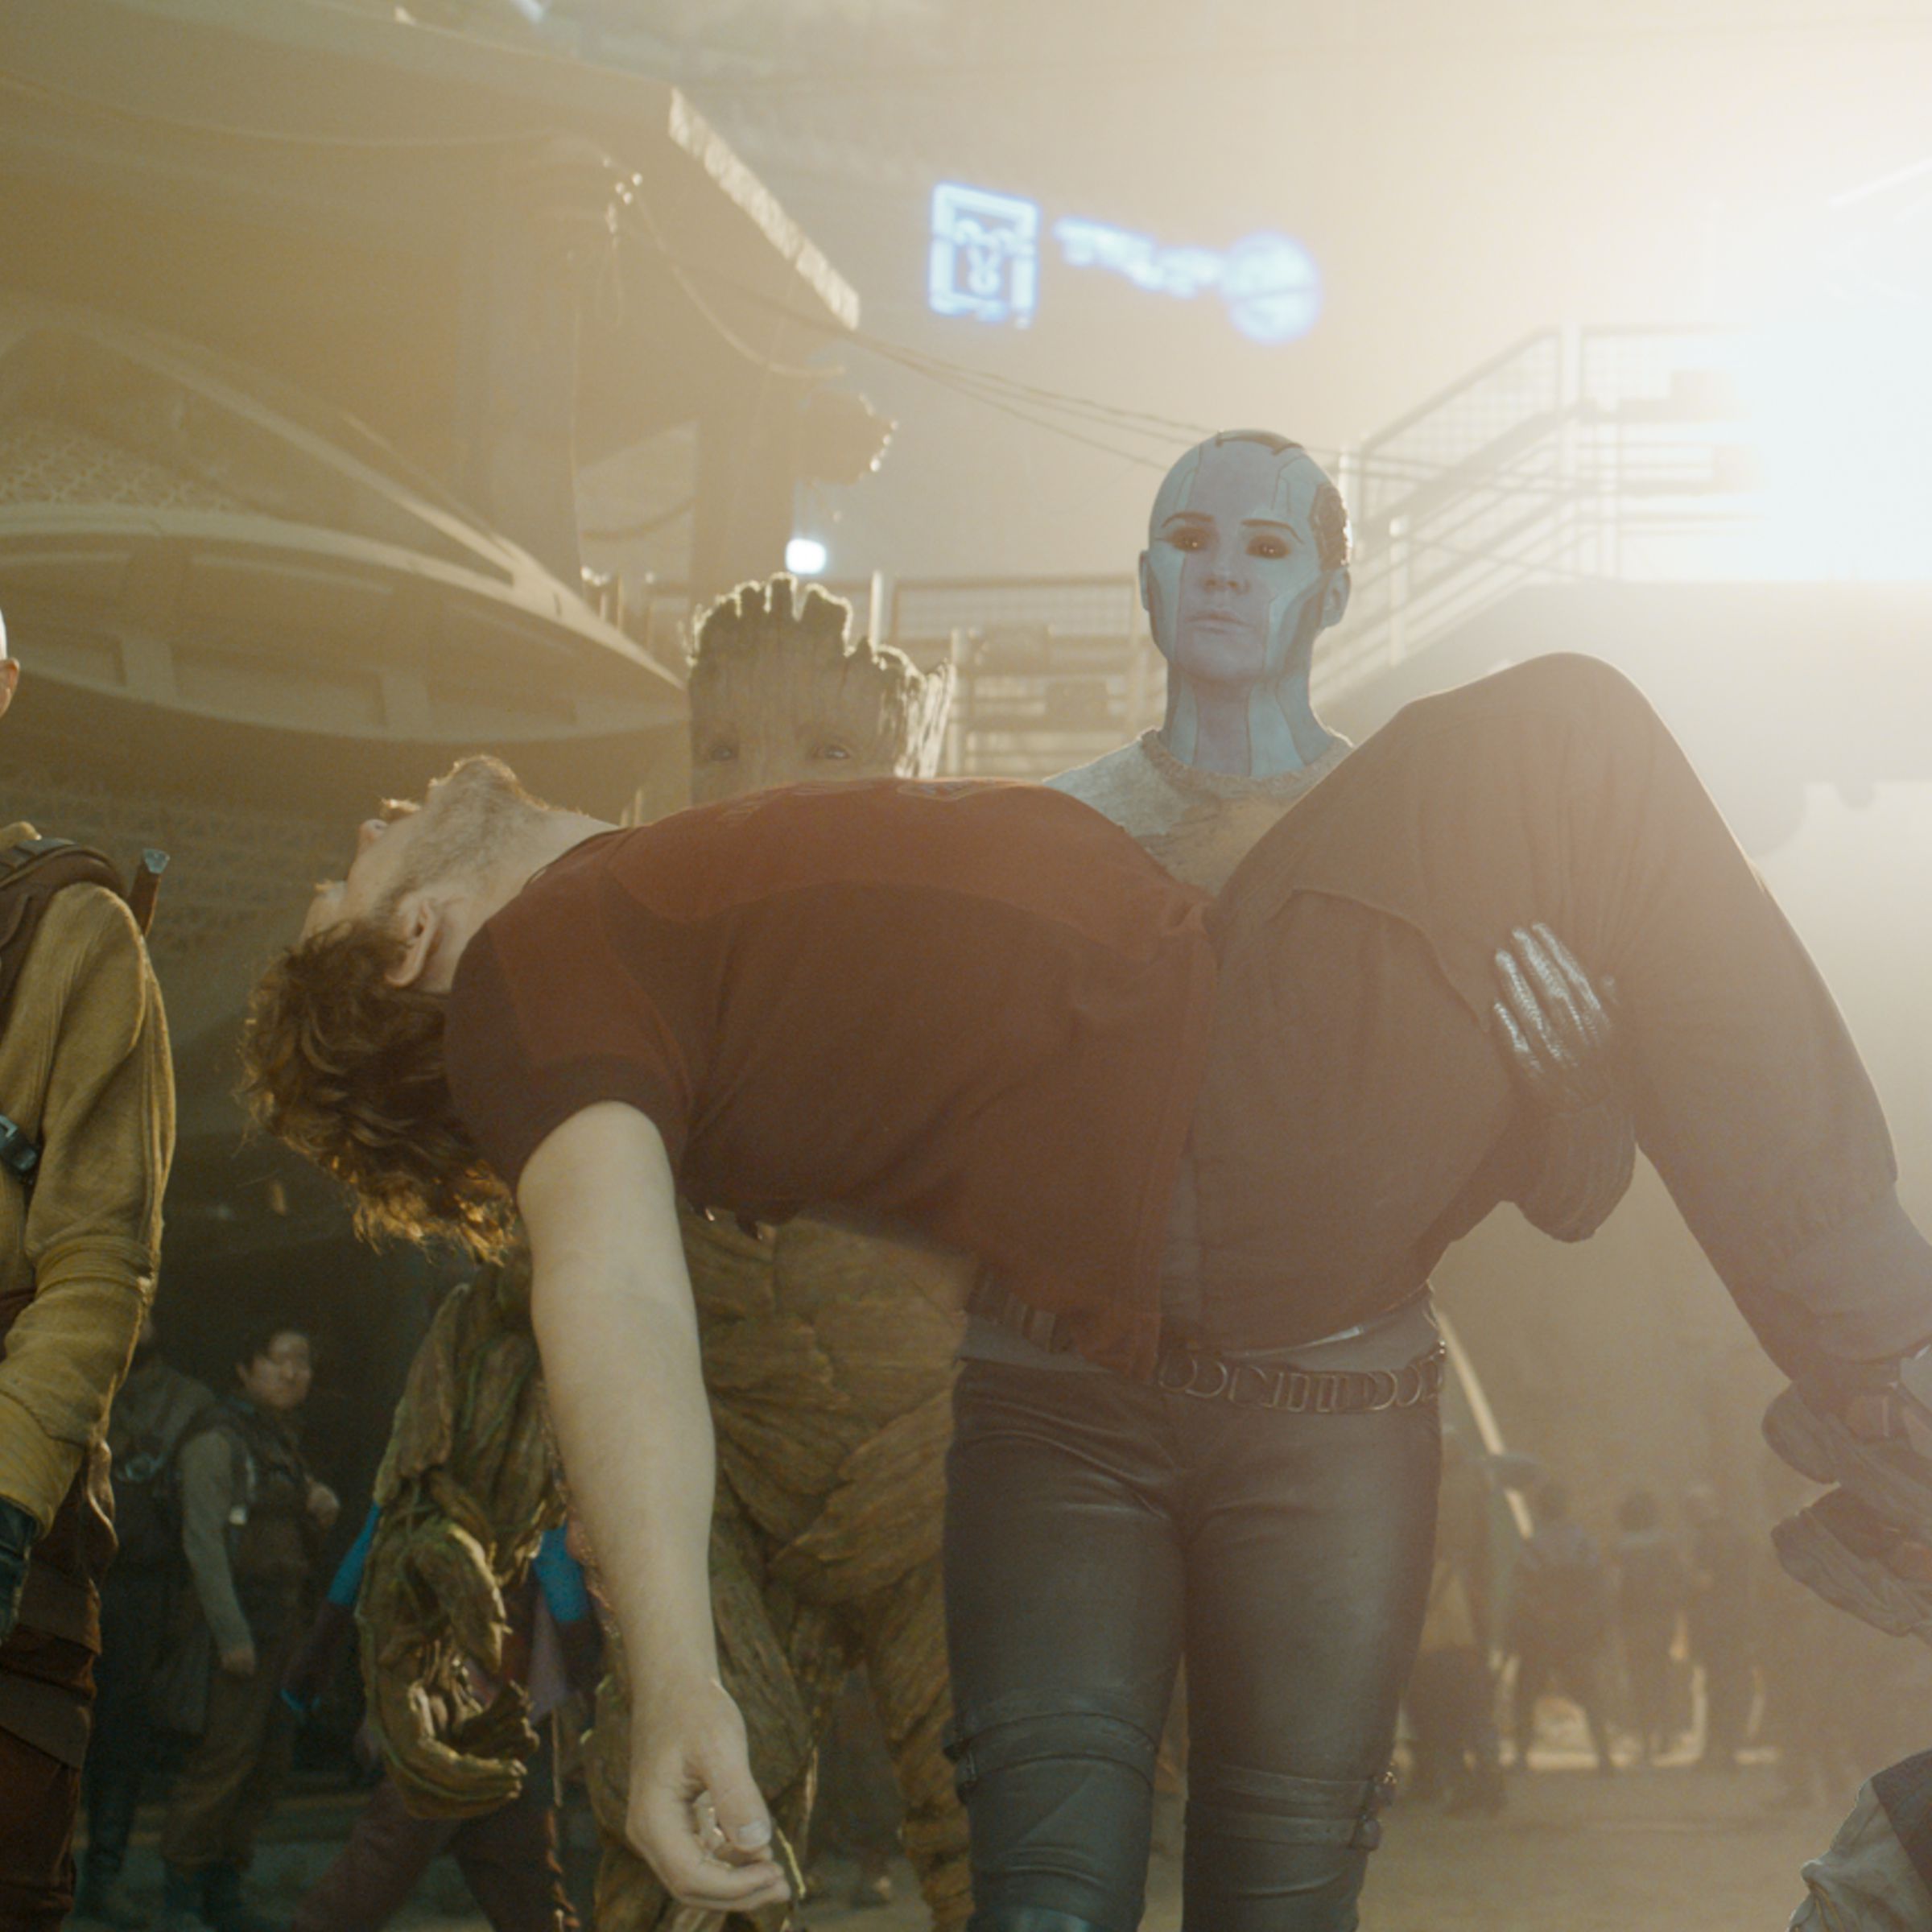 An image of the Guardians from Guardians of the Galaxy. Nebula, a blue cyborg woman, stands in the foreground bridal carrying an unconscious Peter Quill, a large muscular white man.